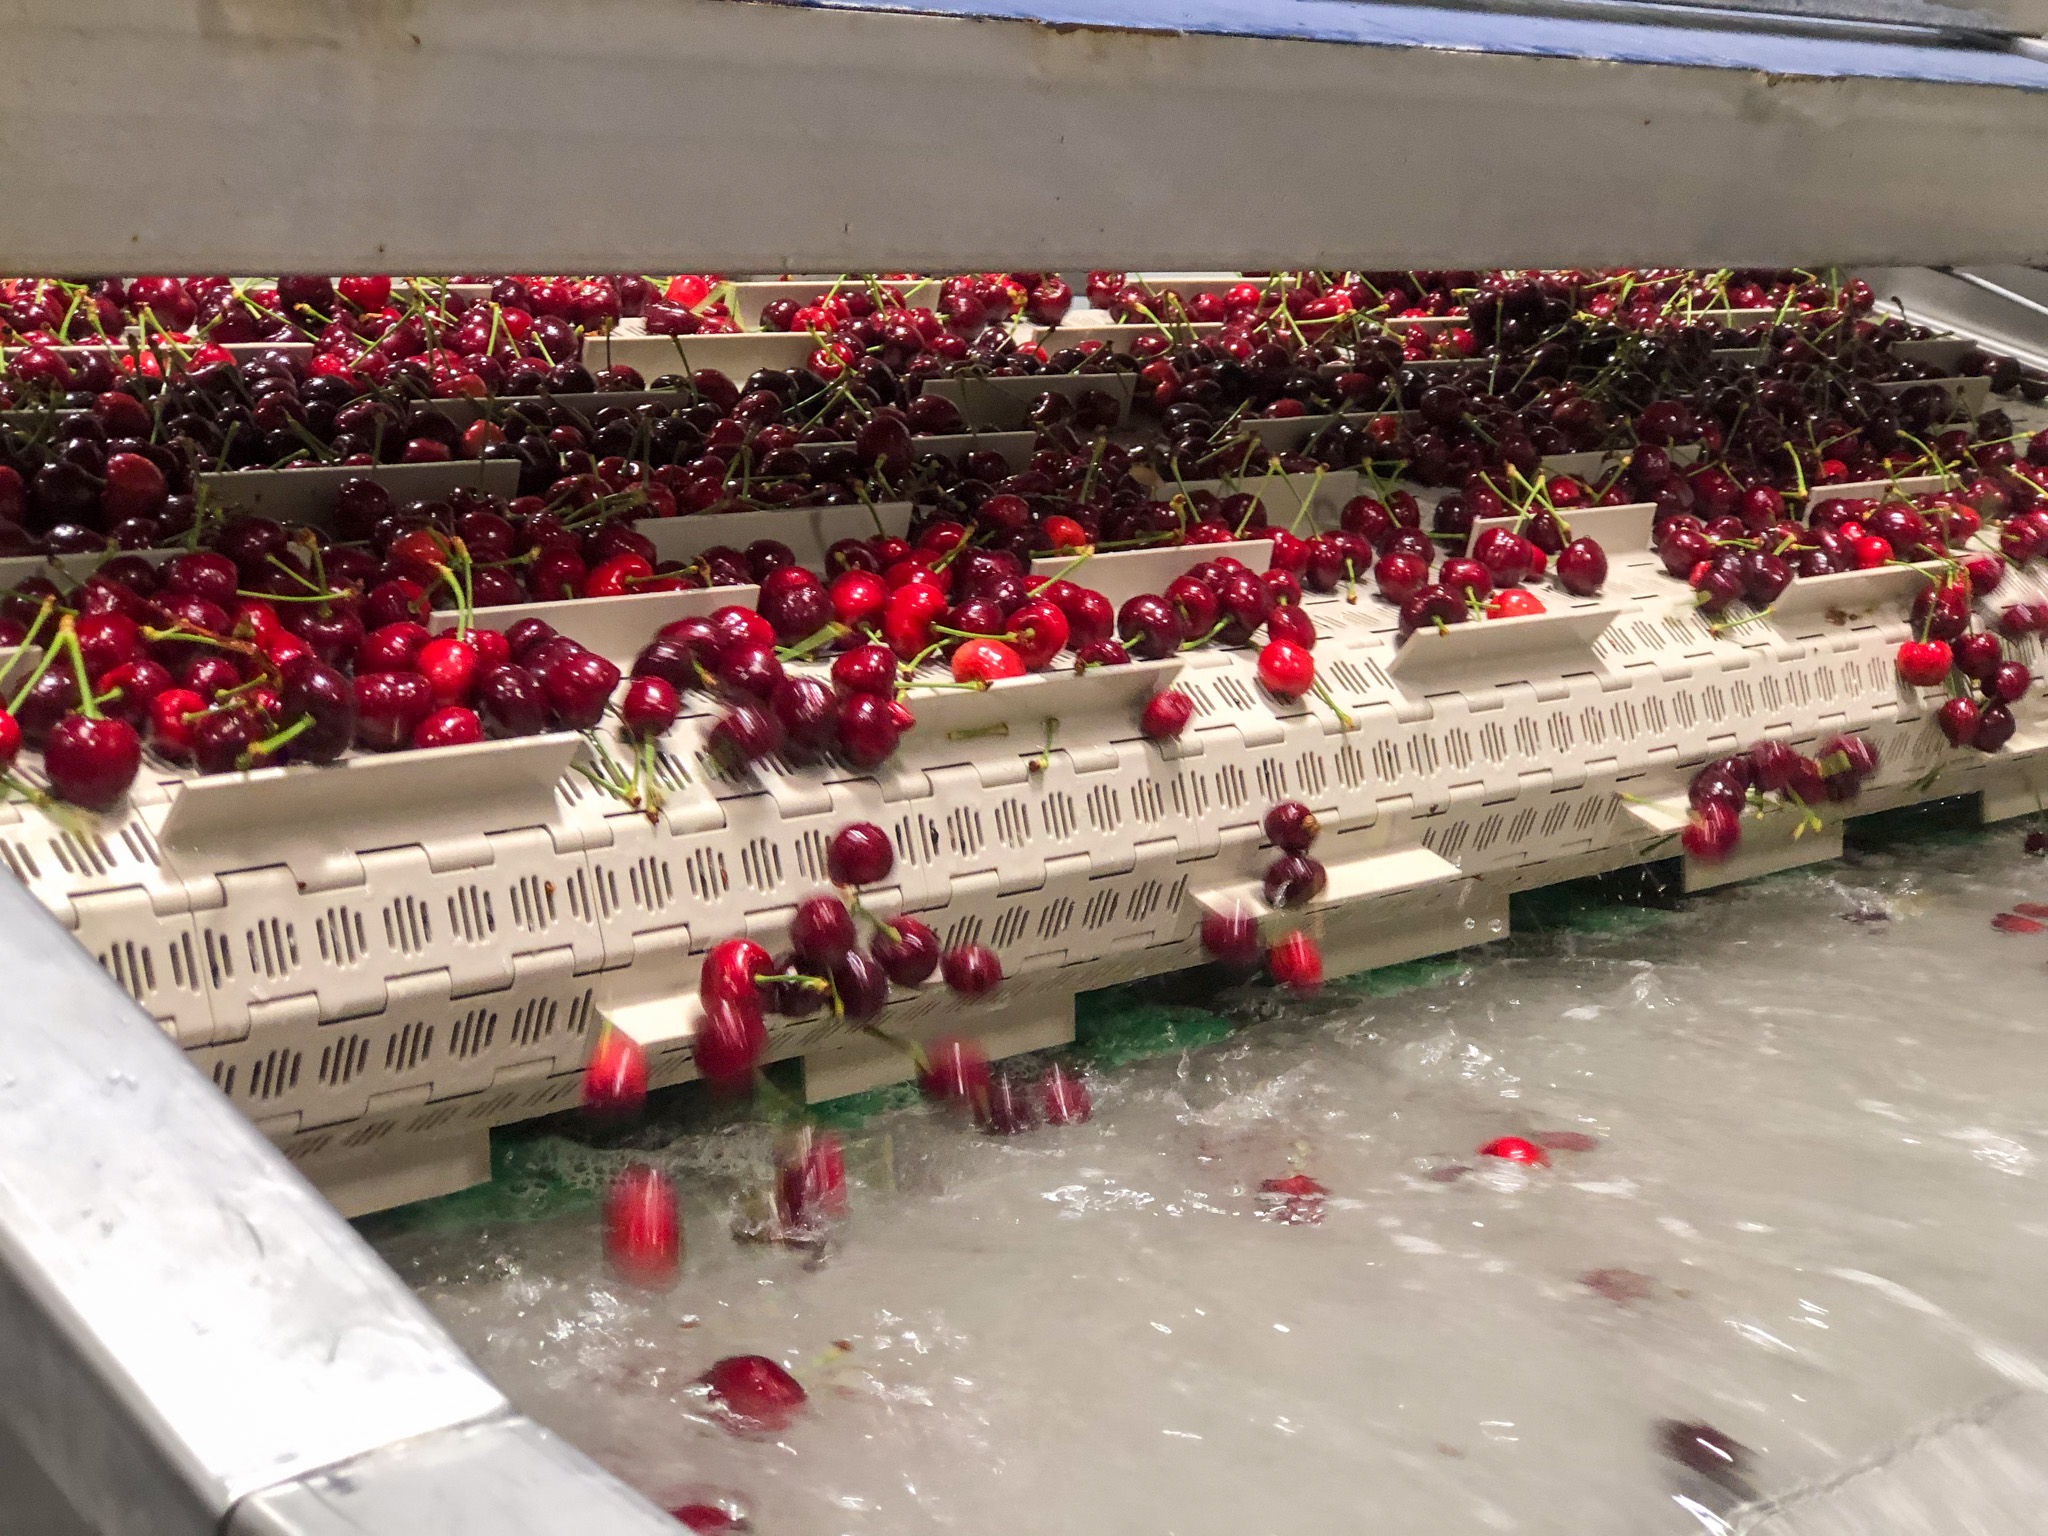 Corral variety cherries gently fall off a conveyor belt into a sluice of water on a cherry packing line in Grandview, Washington